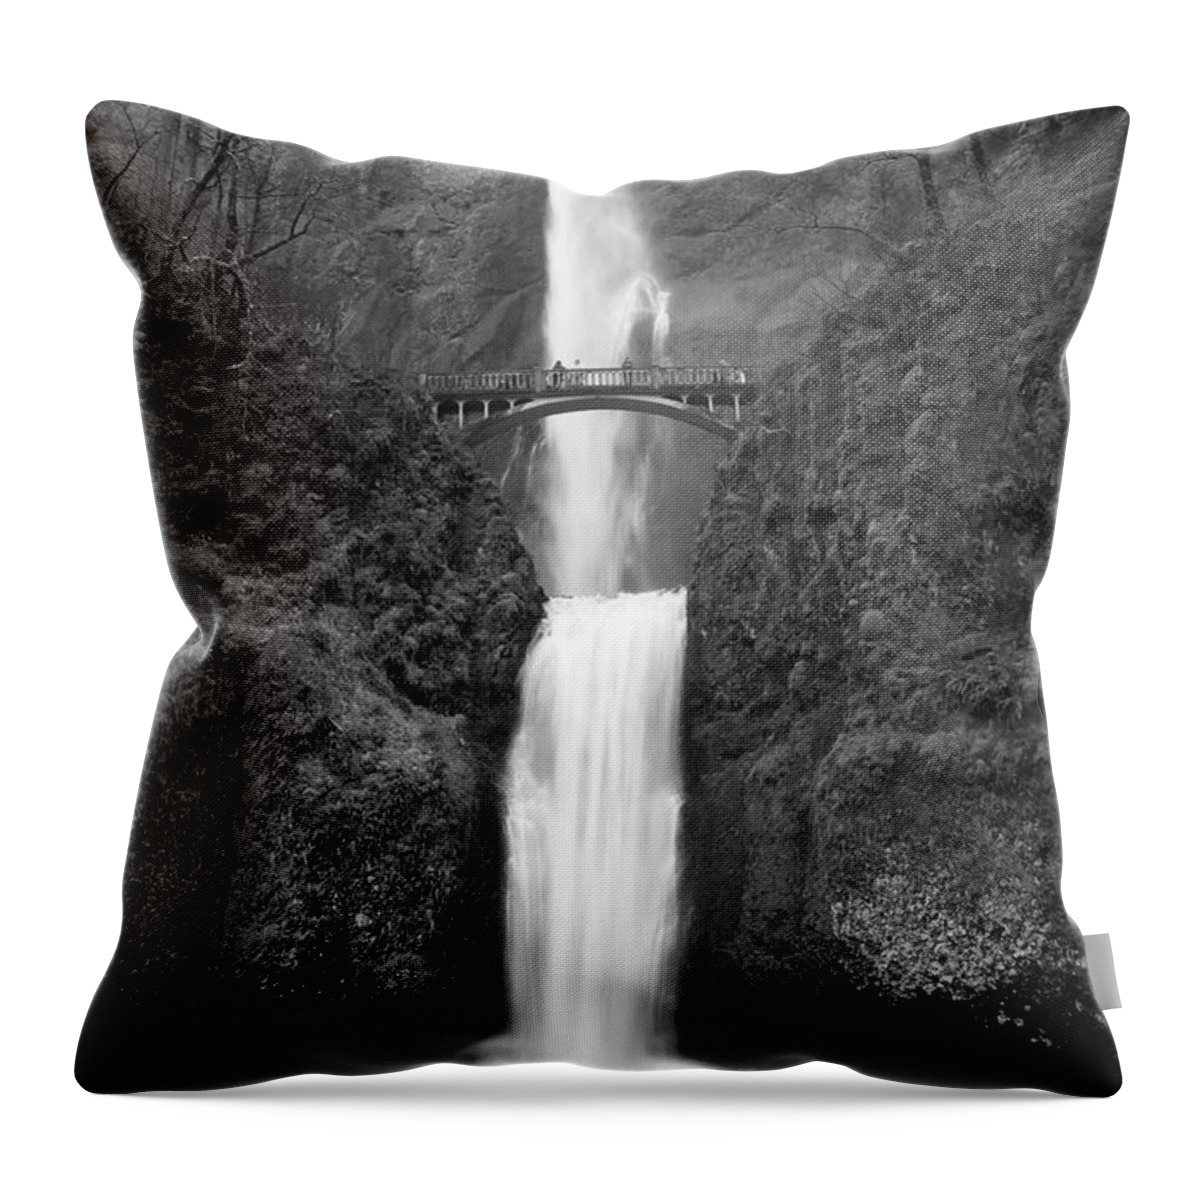 Waterfall Throw Pillow featuring the photograph Multnomah Falls by Ryan Workman Photography